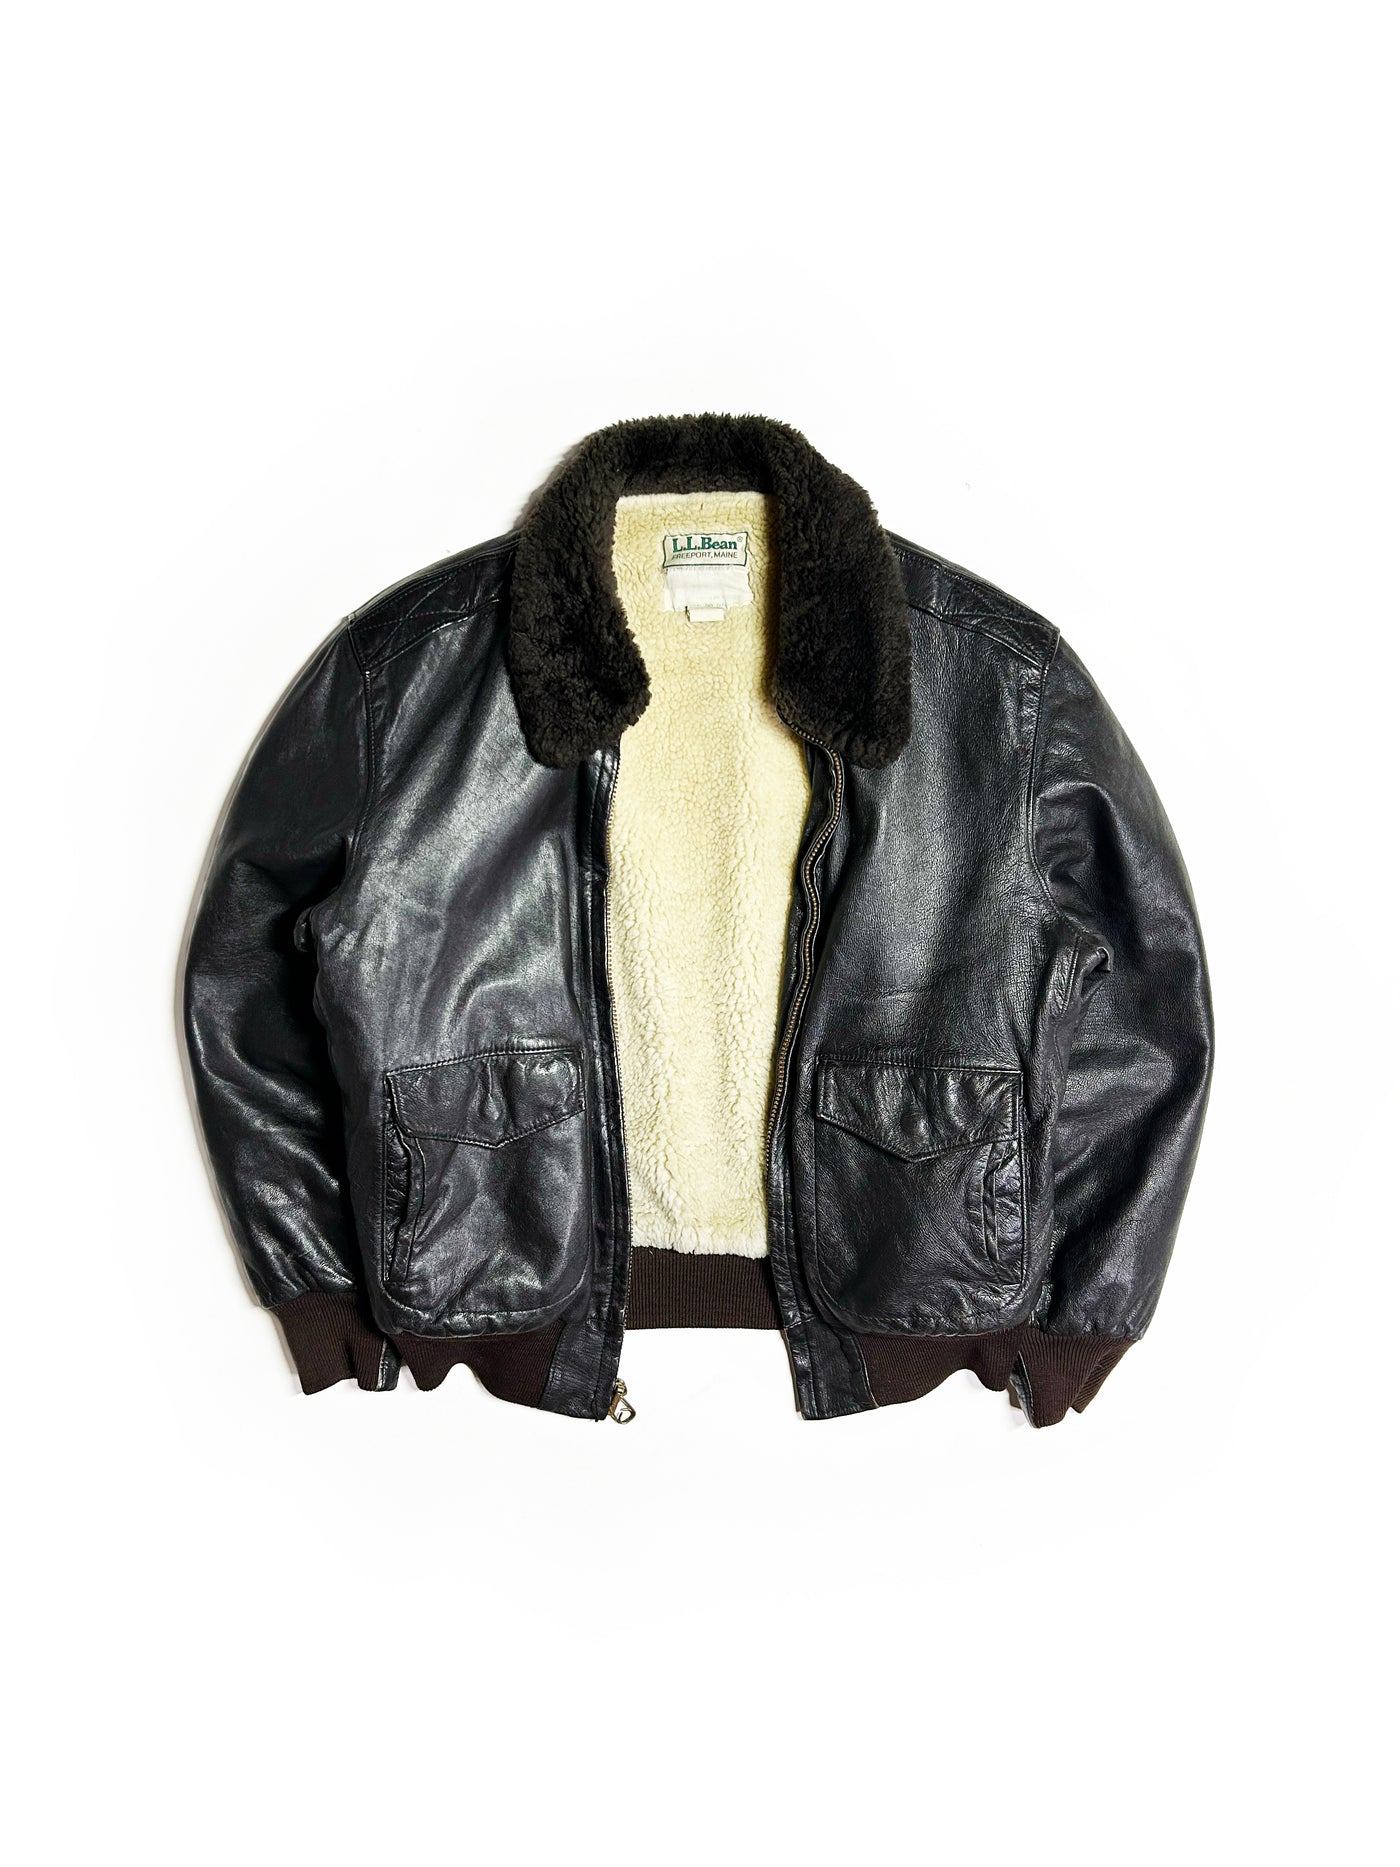 Vintage 70s LL Bean Lined Leather Bomber Jacket